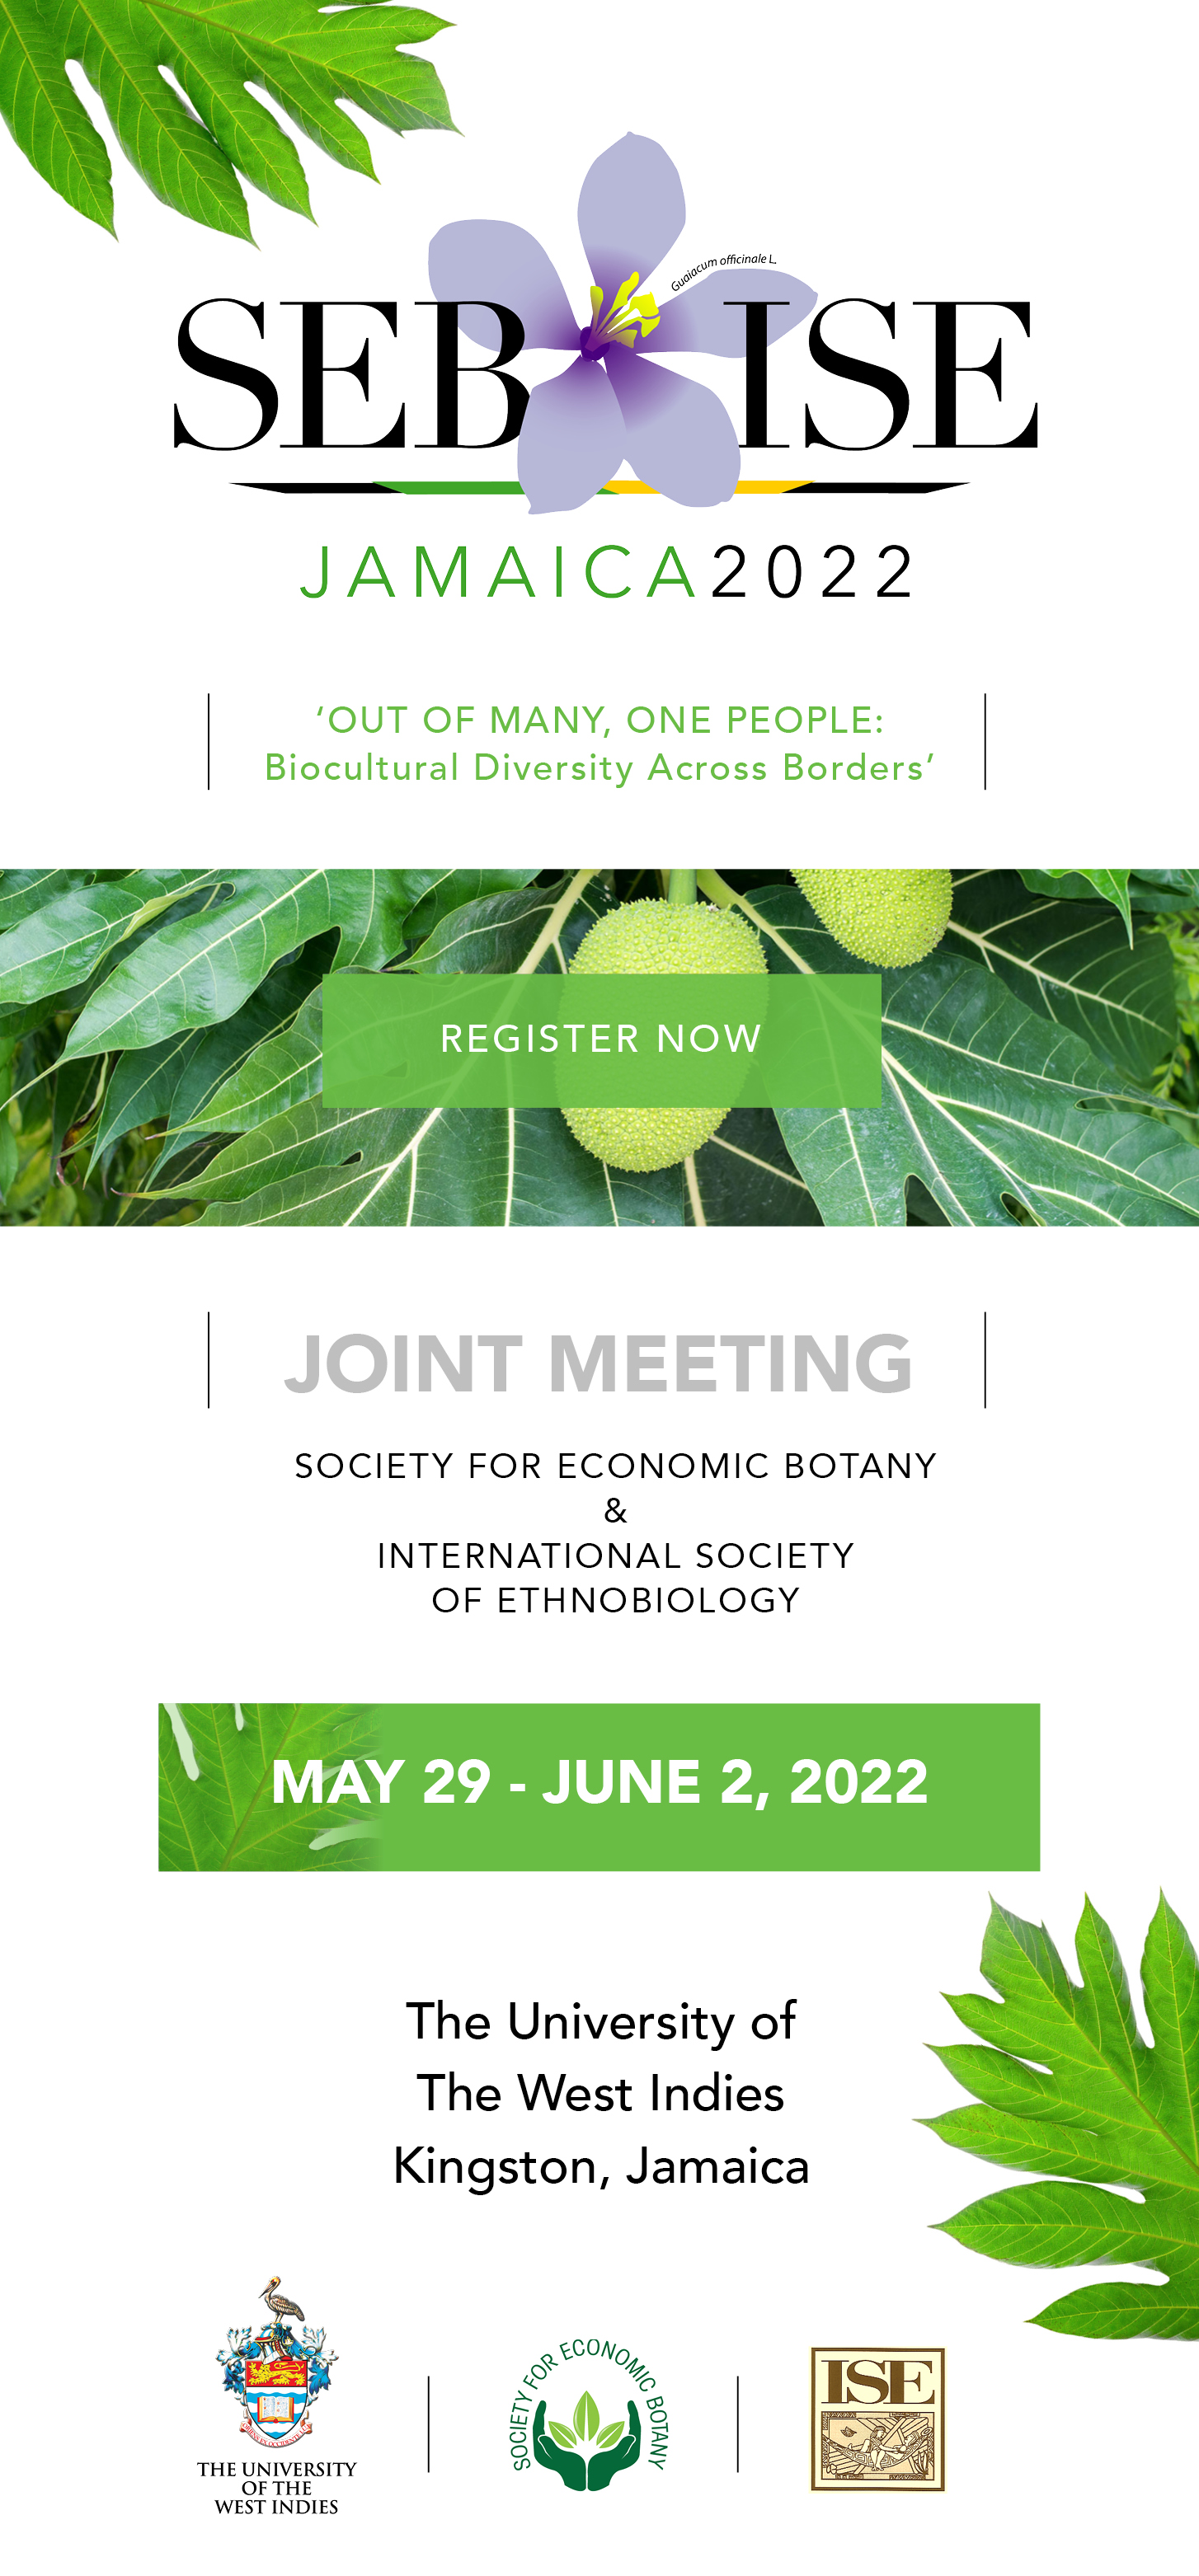 SEB/ISE Jamaica 2022, Joint Meeting, Society for Economic Botany and International Society of Ethnobiology, May 29-June 2, 2022. The University of The West Indies, Kingston, Jamaica